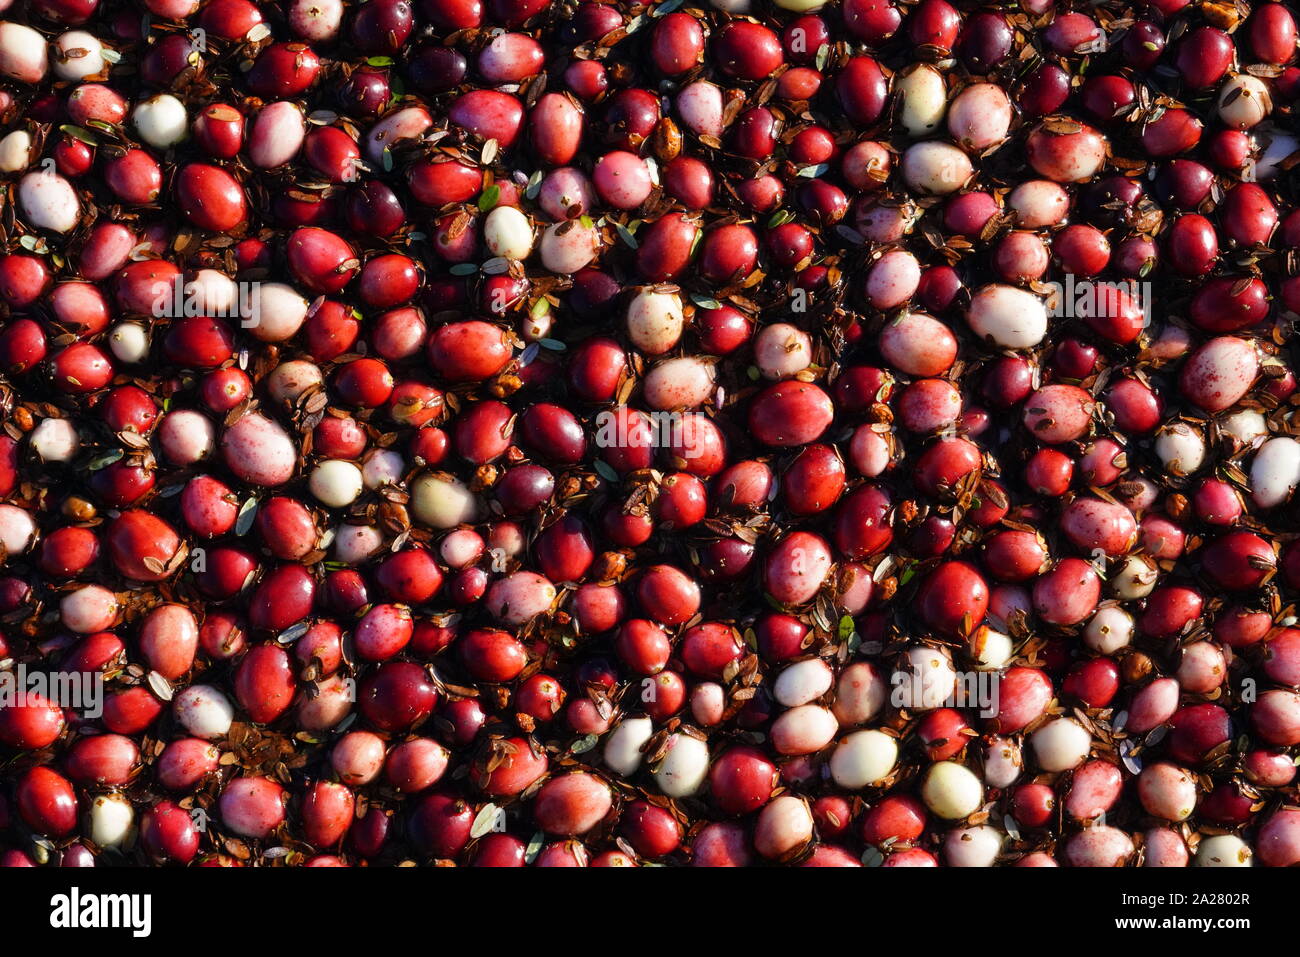 Close up of cranberries on Wetherby Cranberry farms of Ocean Spray, Cranberry festival Warrens, Wisconsin Stock Photo